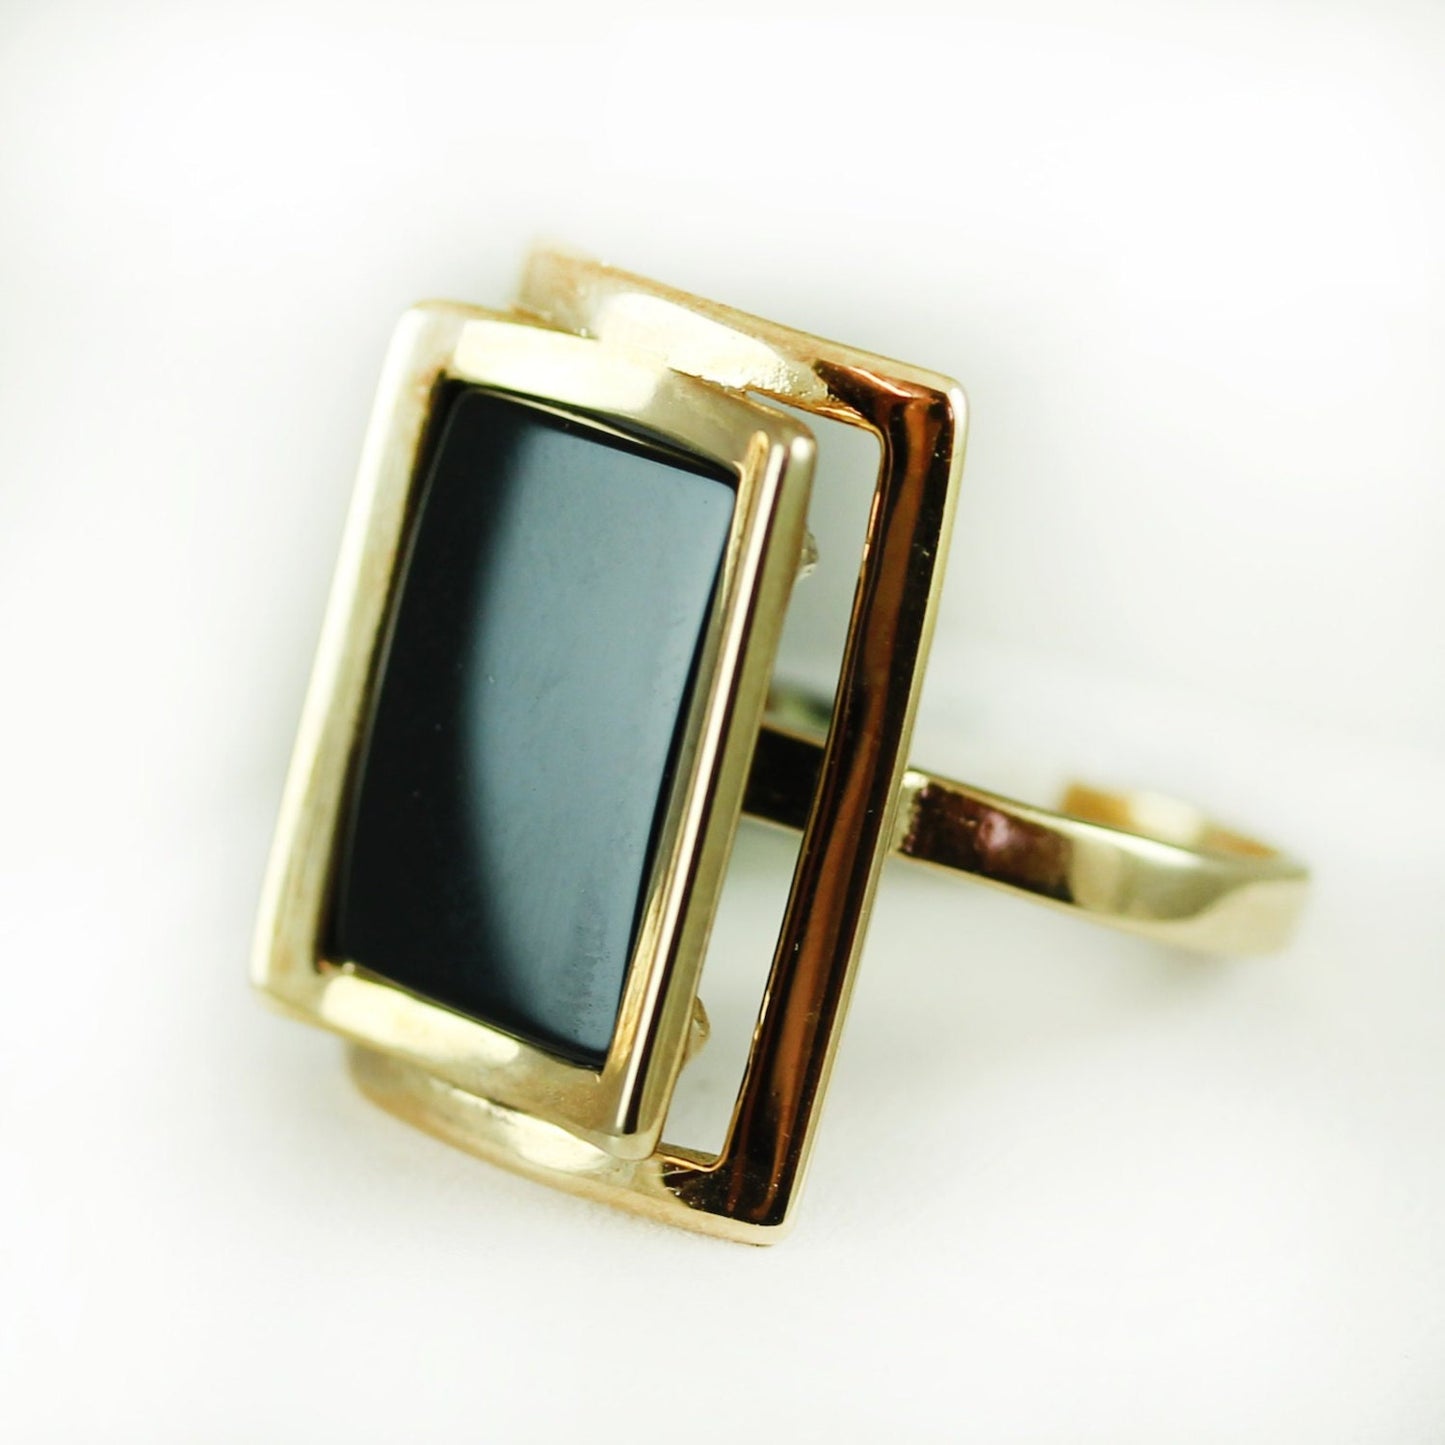 Vintage Ring Genuine Onyx Rectangle 18k Gold  #R327 - Limited Stock - Never Worn